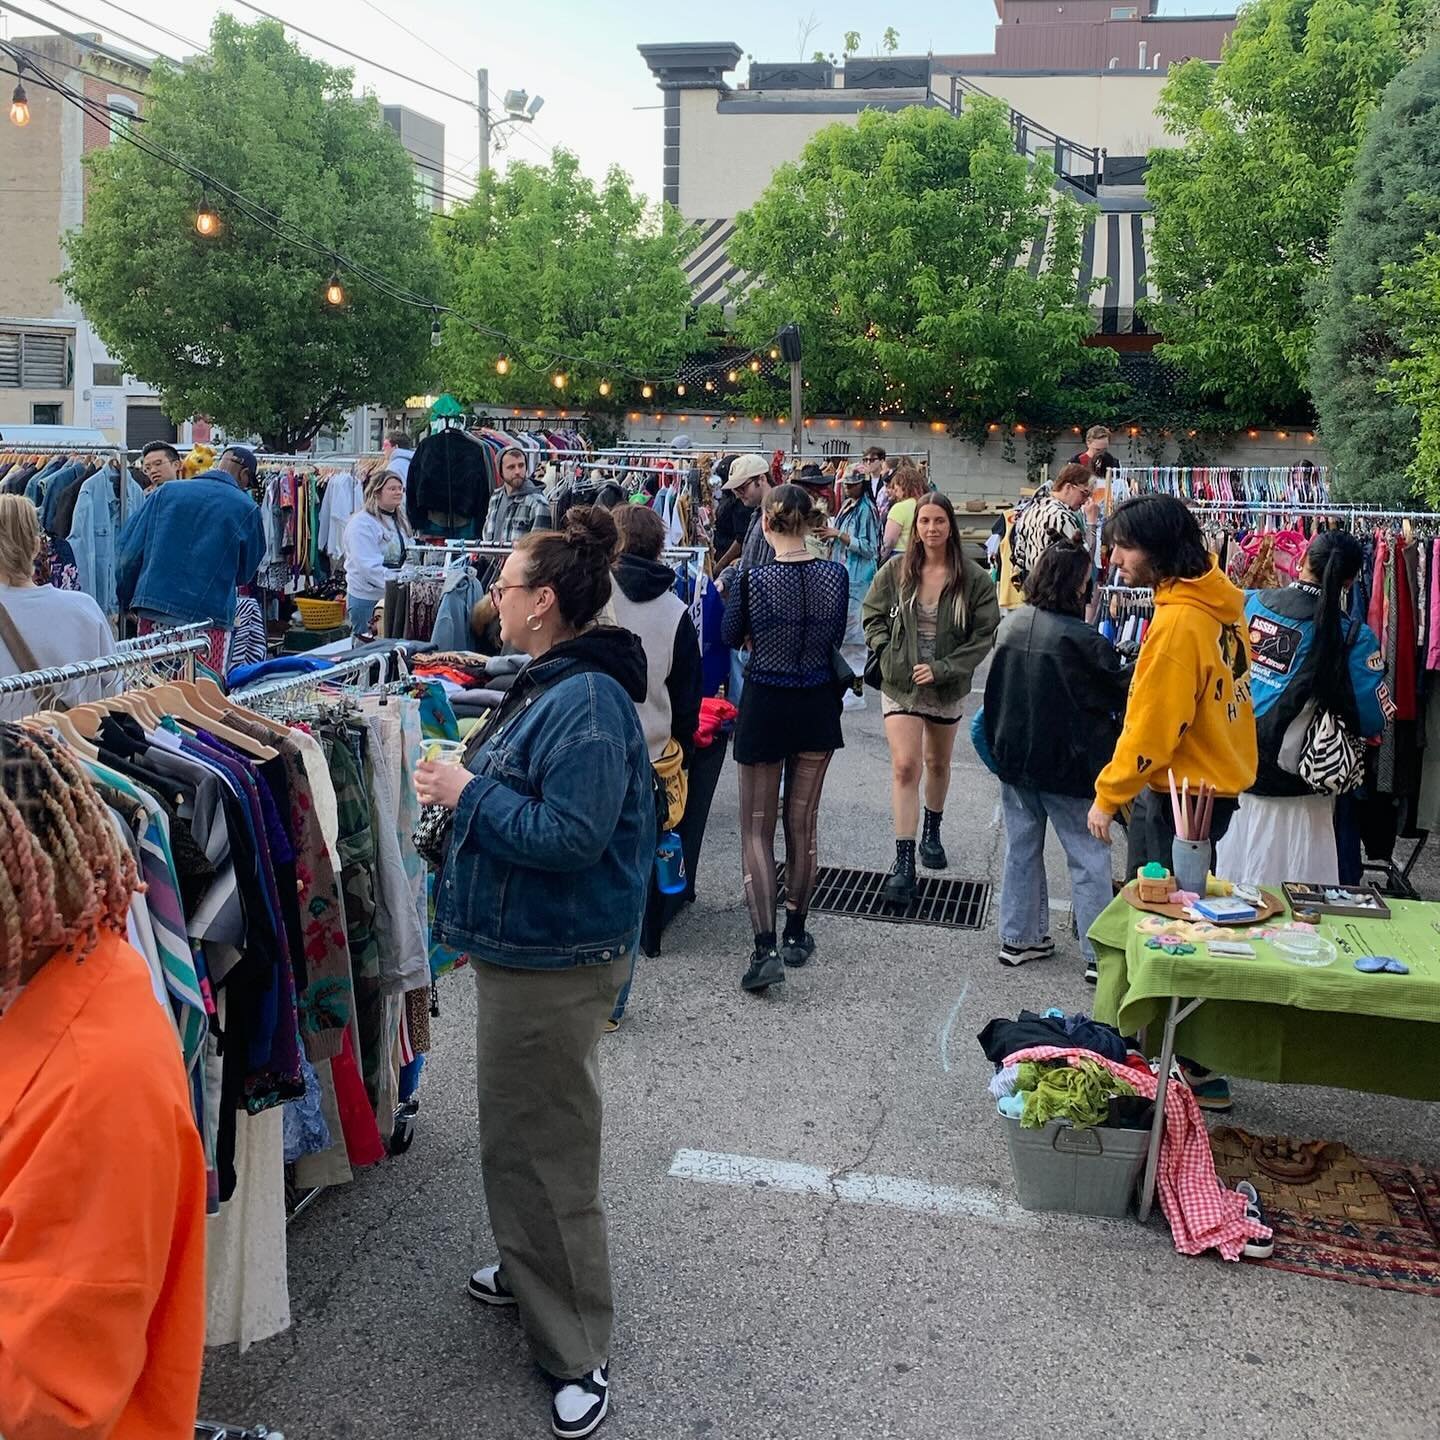 WOW! What an Earth Day @northbowlphilly this past Monday for @reworktherunway 🌎♻️ Thanks to our 13 local vintage clothings vendors &amp; all who came out to shop &amp; support them in the beer garden from 6-9pm 🛍️ Our next market is Saturday 5/18 @